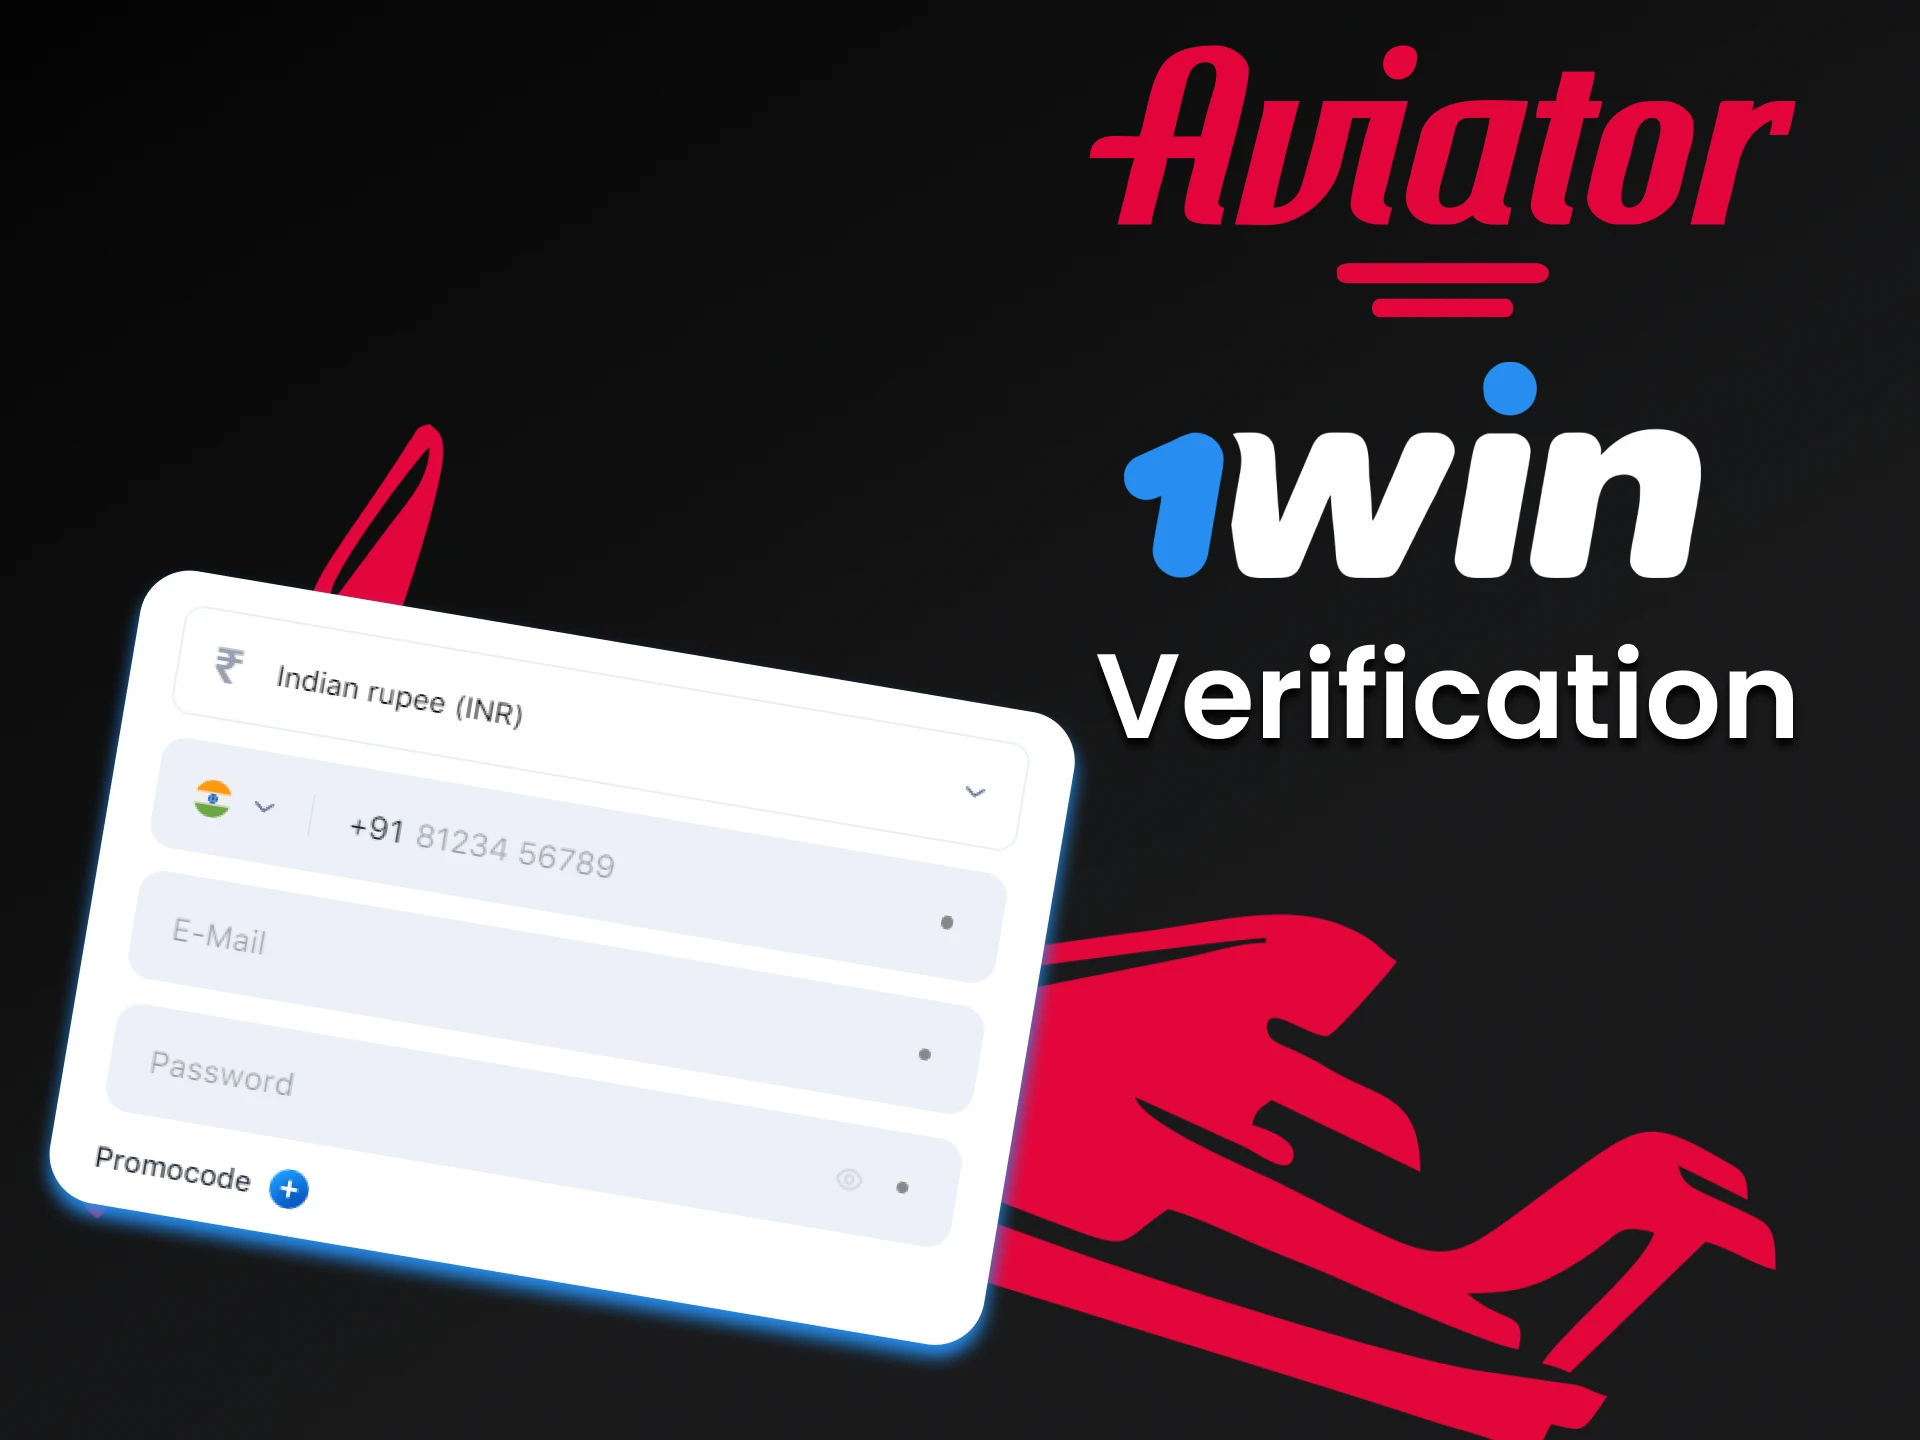 Fill in the data on the 1win website to play Aviator.